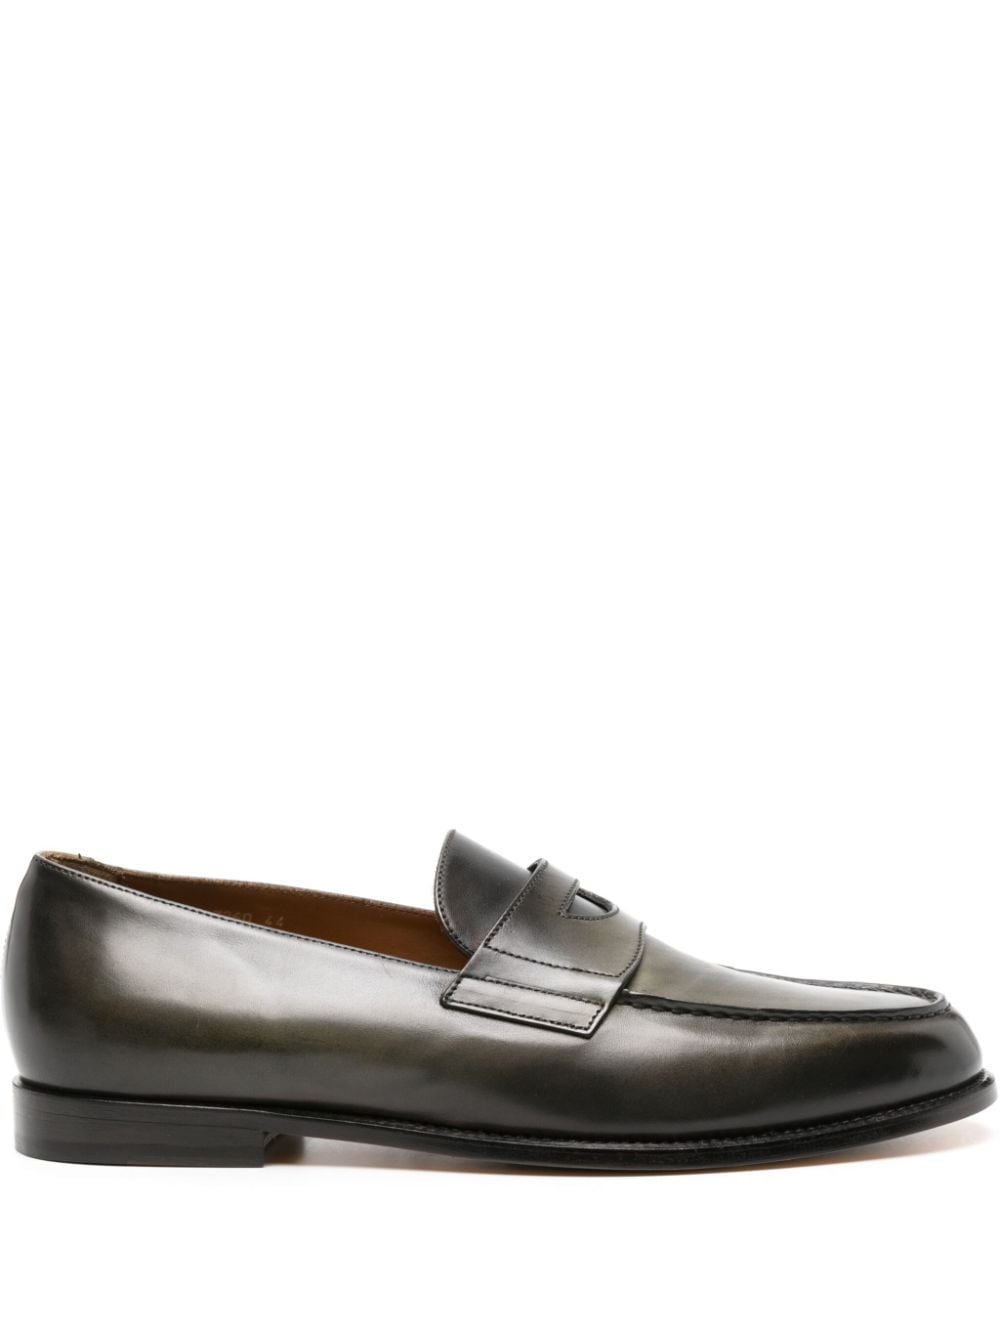 Image 1 of Doucal's penny-slot leather loafers